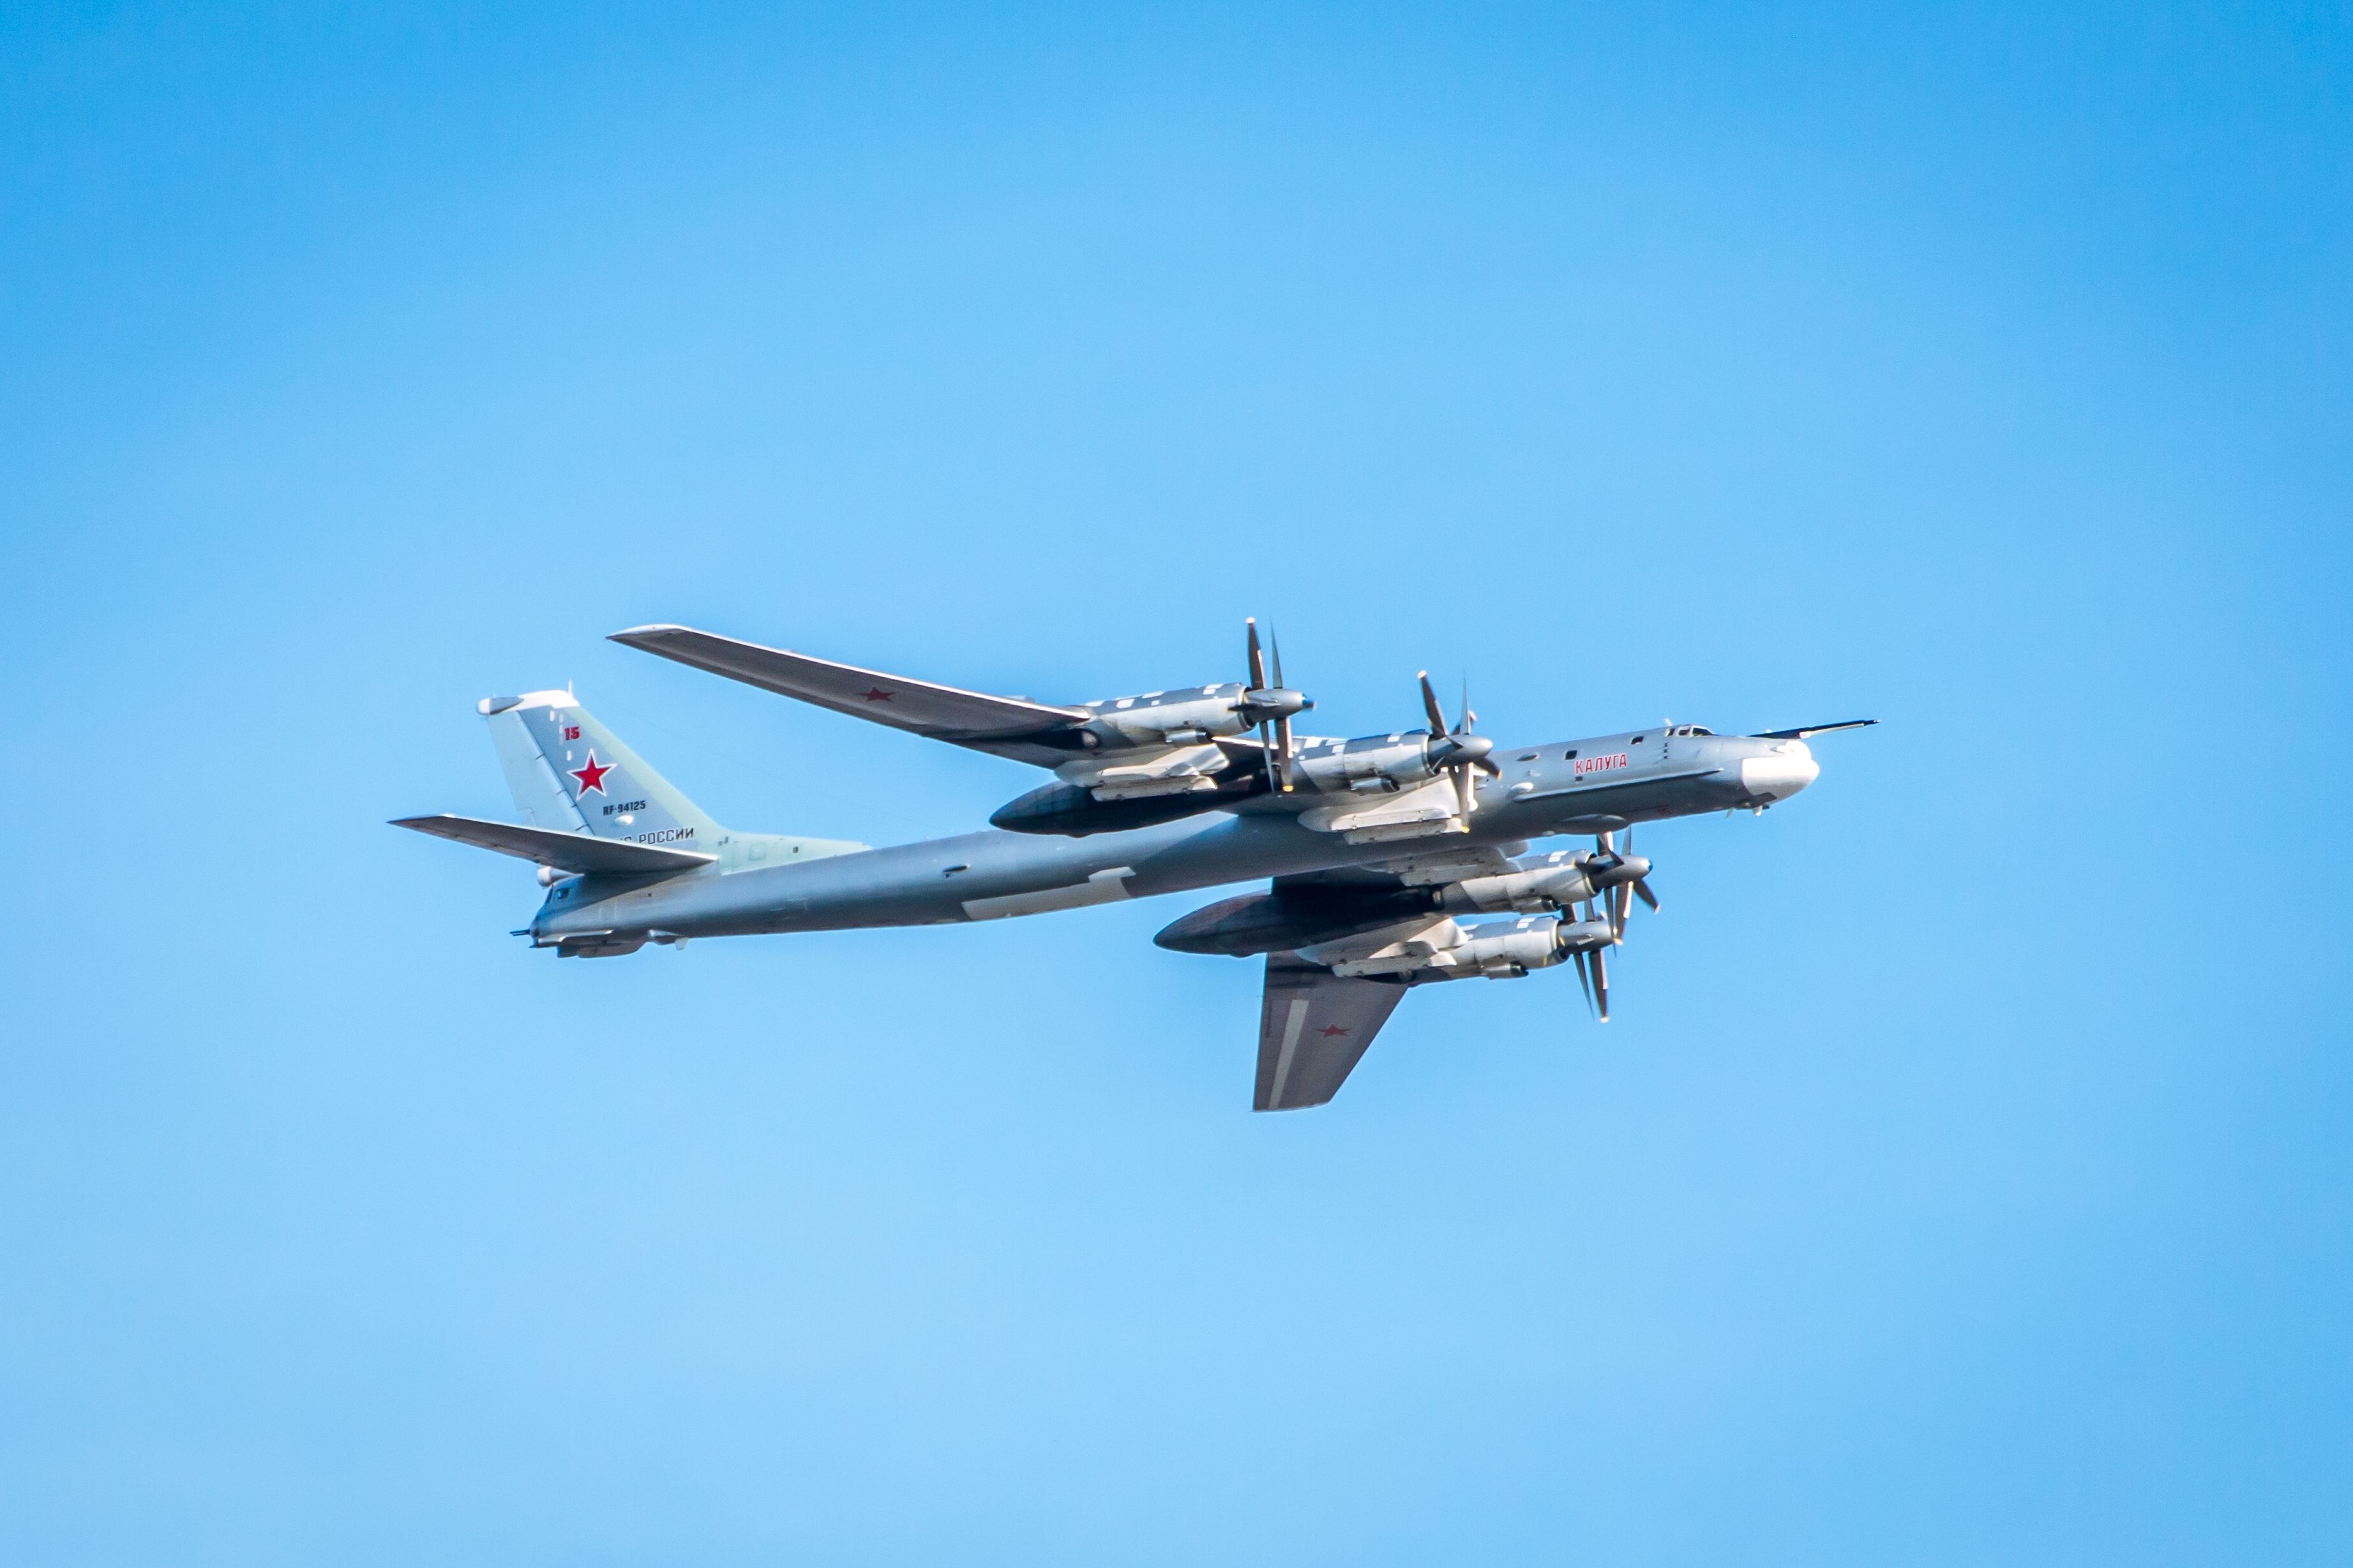 Tupolev Tu-95 flying in the air shutterstock_2097172165